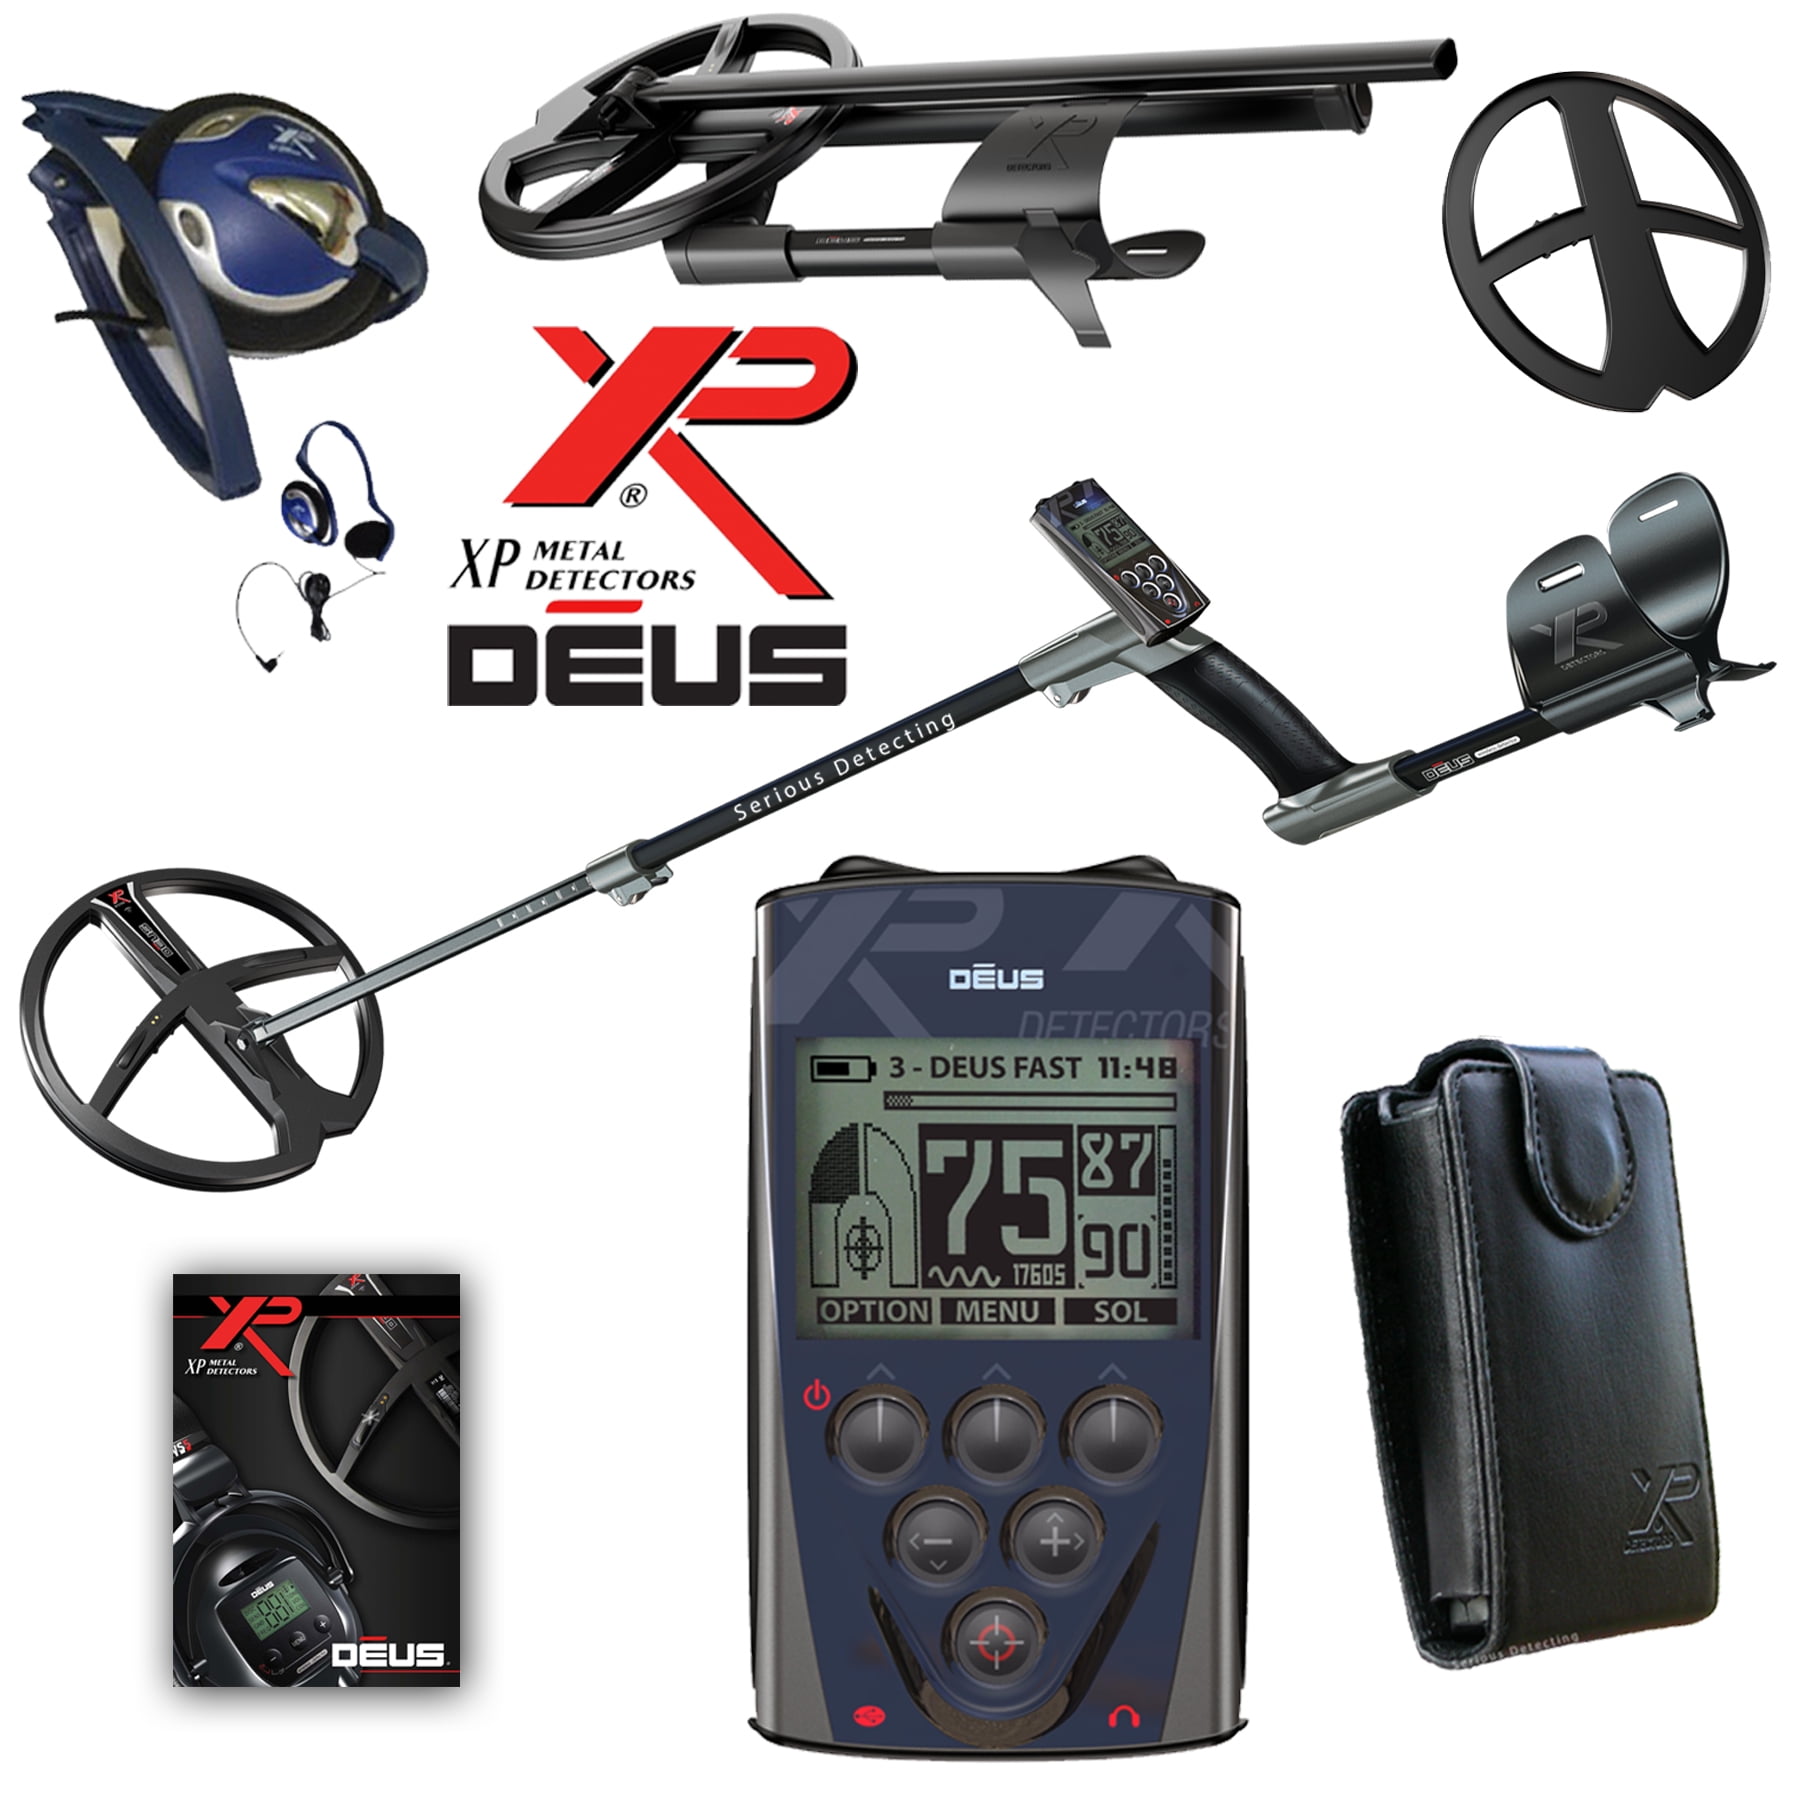 XP Deus Metal Detector w/ FX-02 Wired Backphone, Remote and 11” X35 Search  Coil - Walmart.com